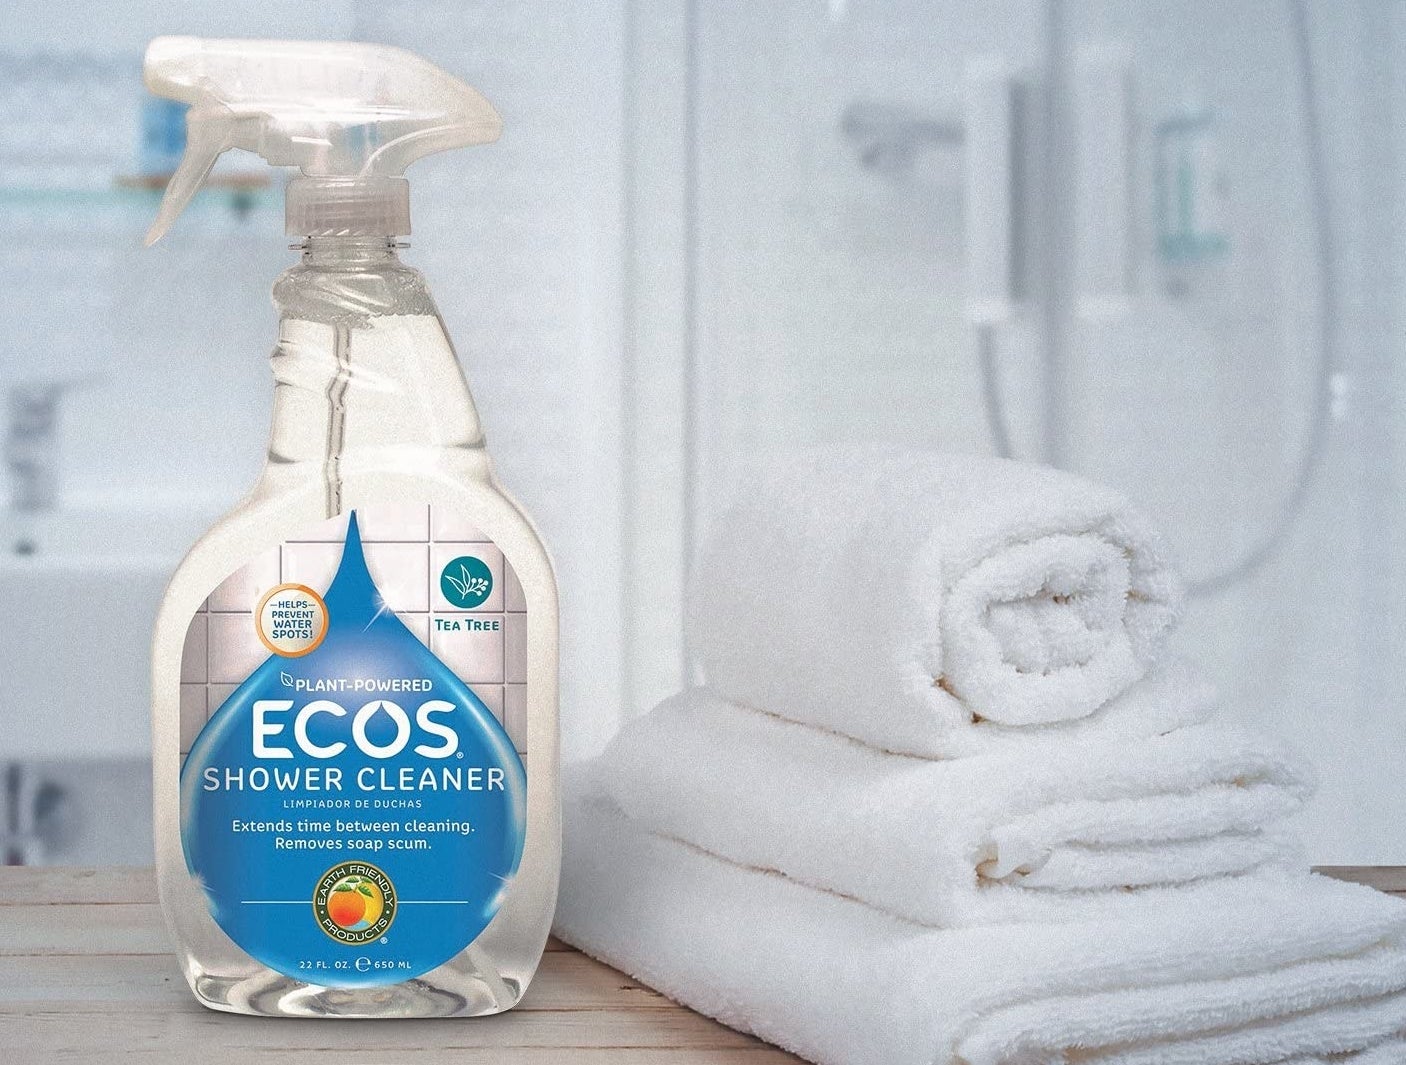 bottle of ecos shower cleaner on bathroom counter next to towels